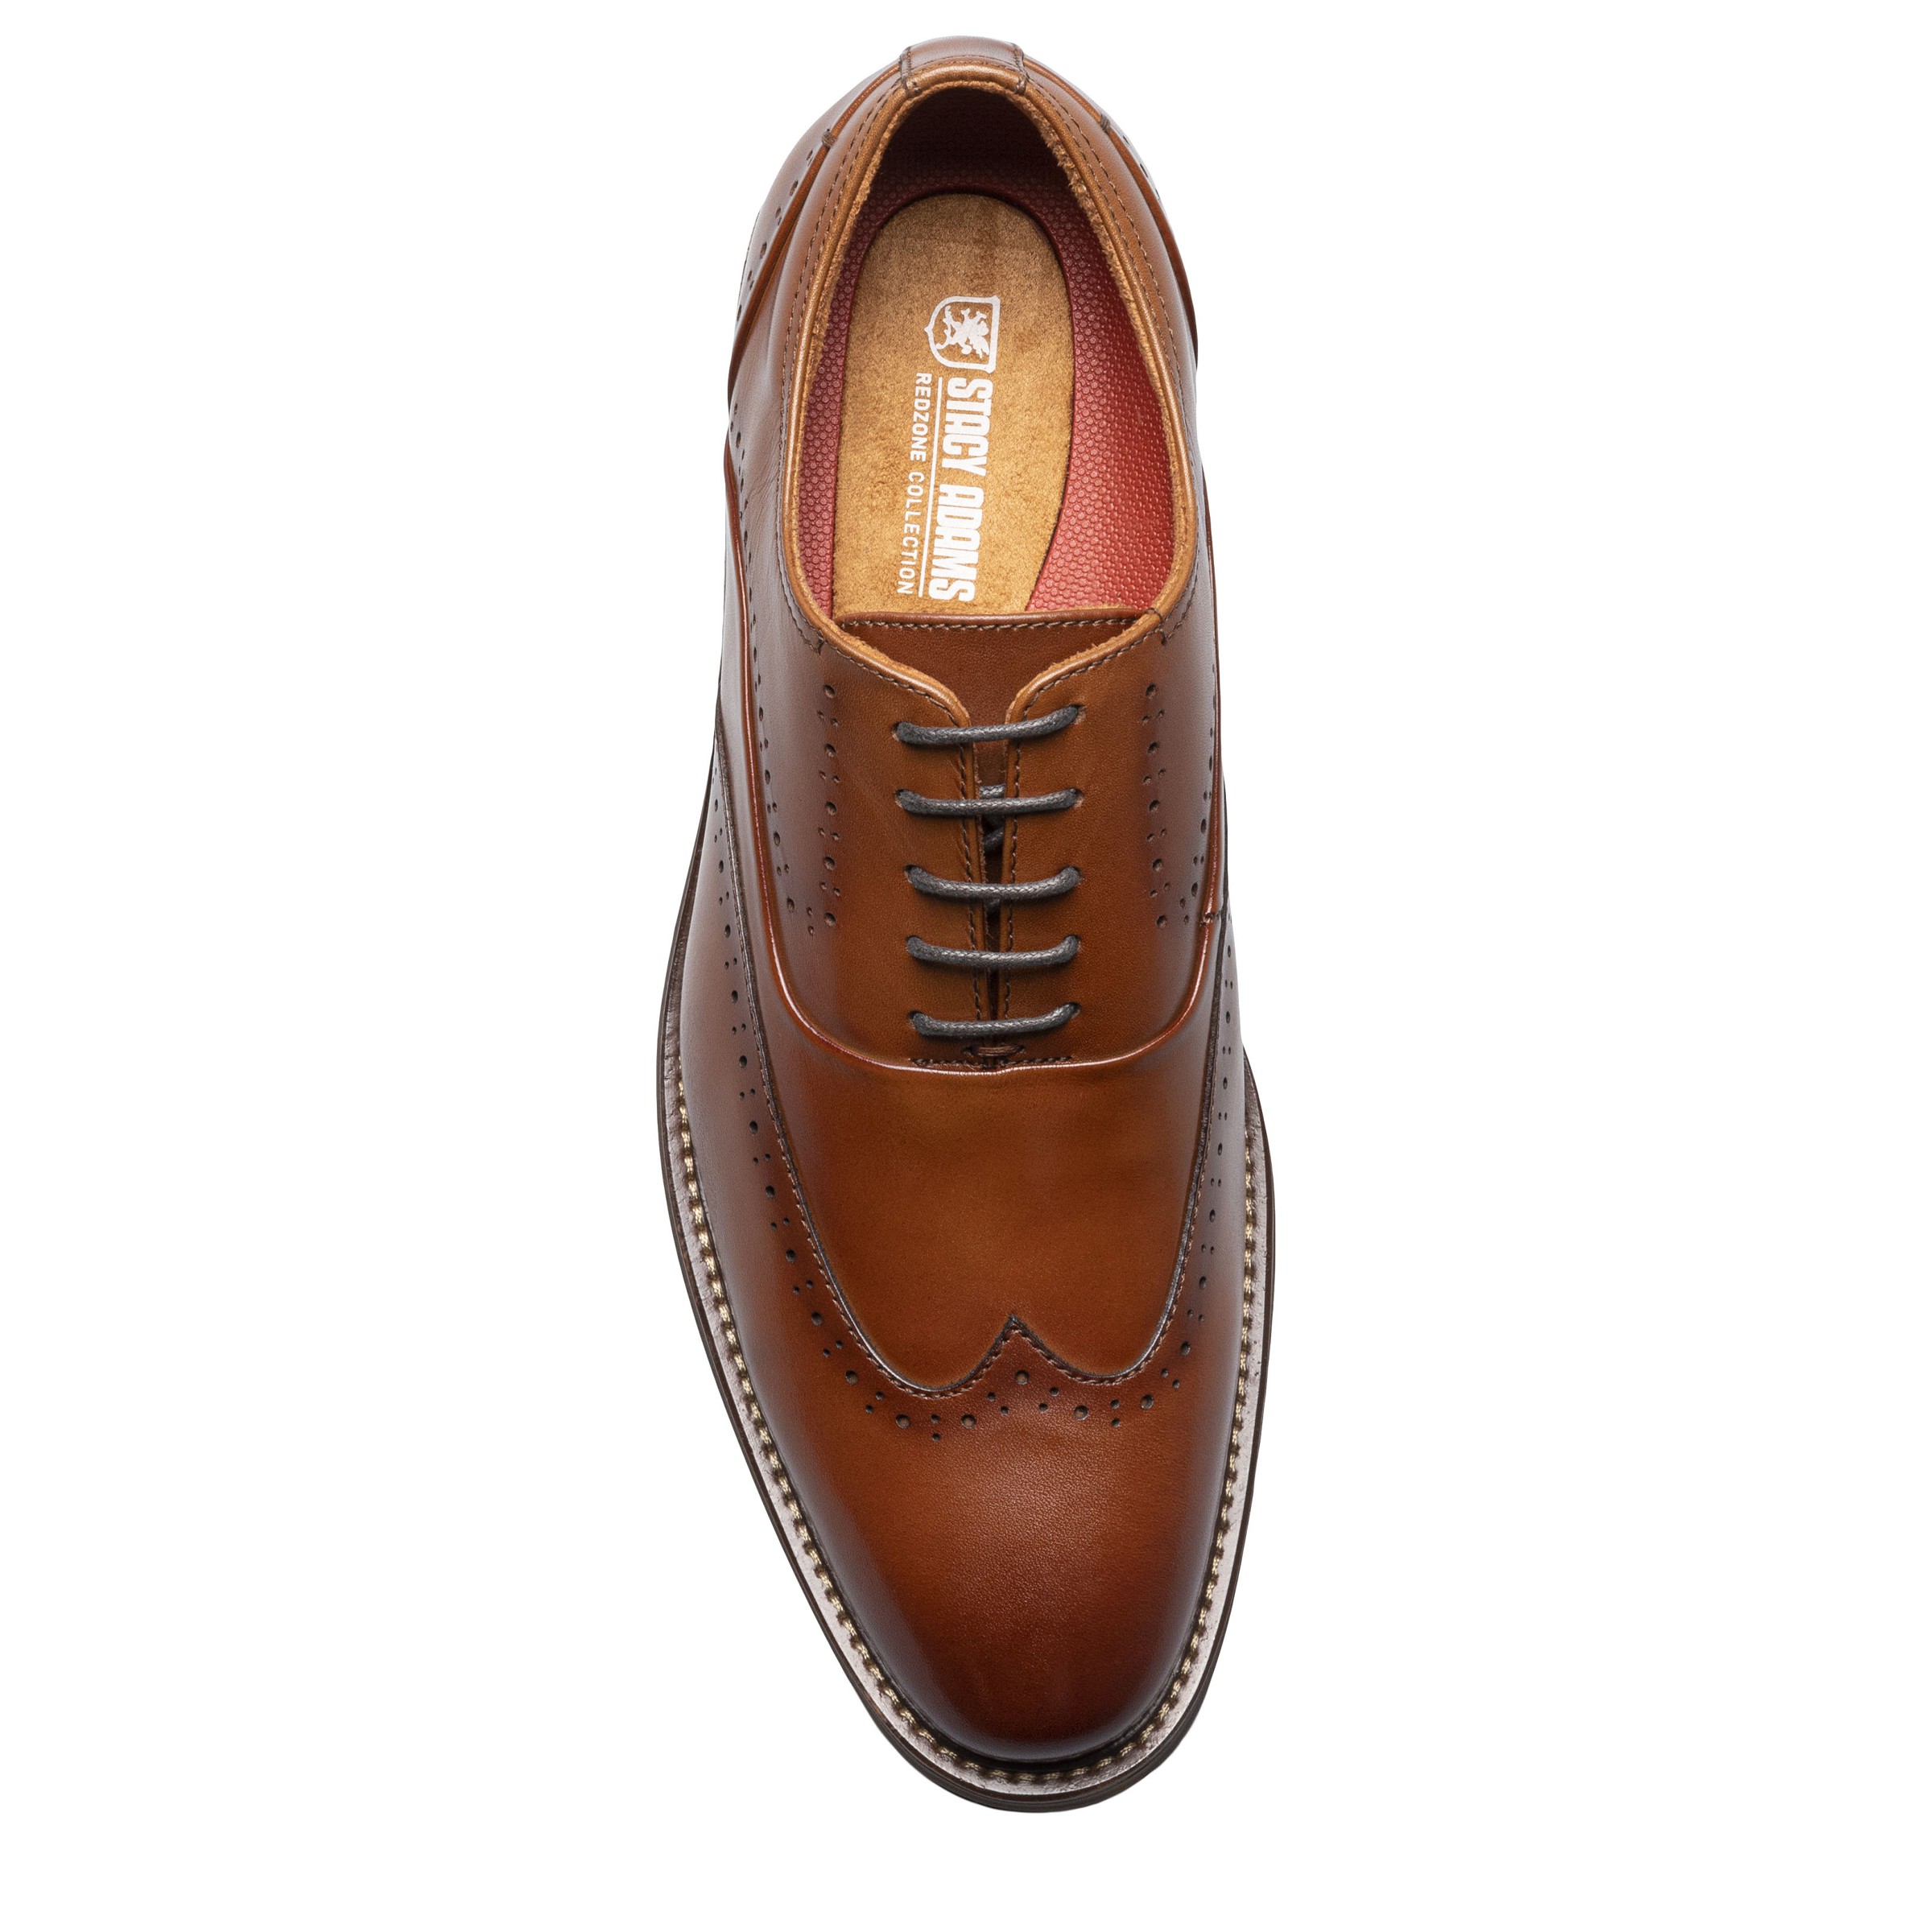 Men's Macarther Leather Dress Shoe